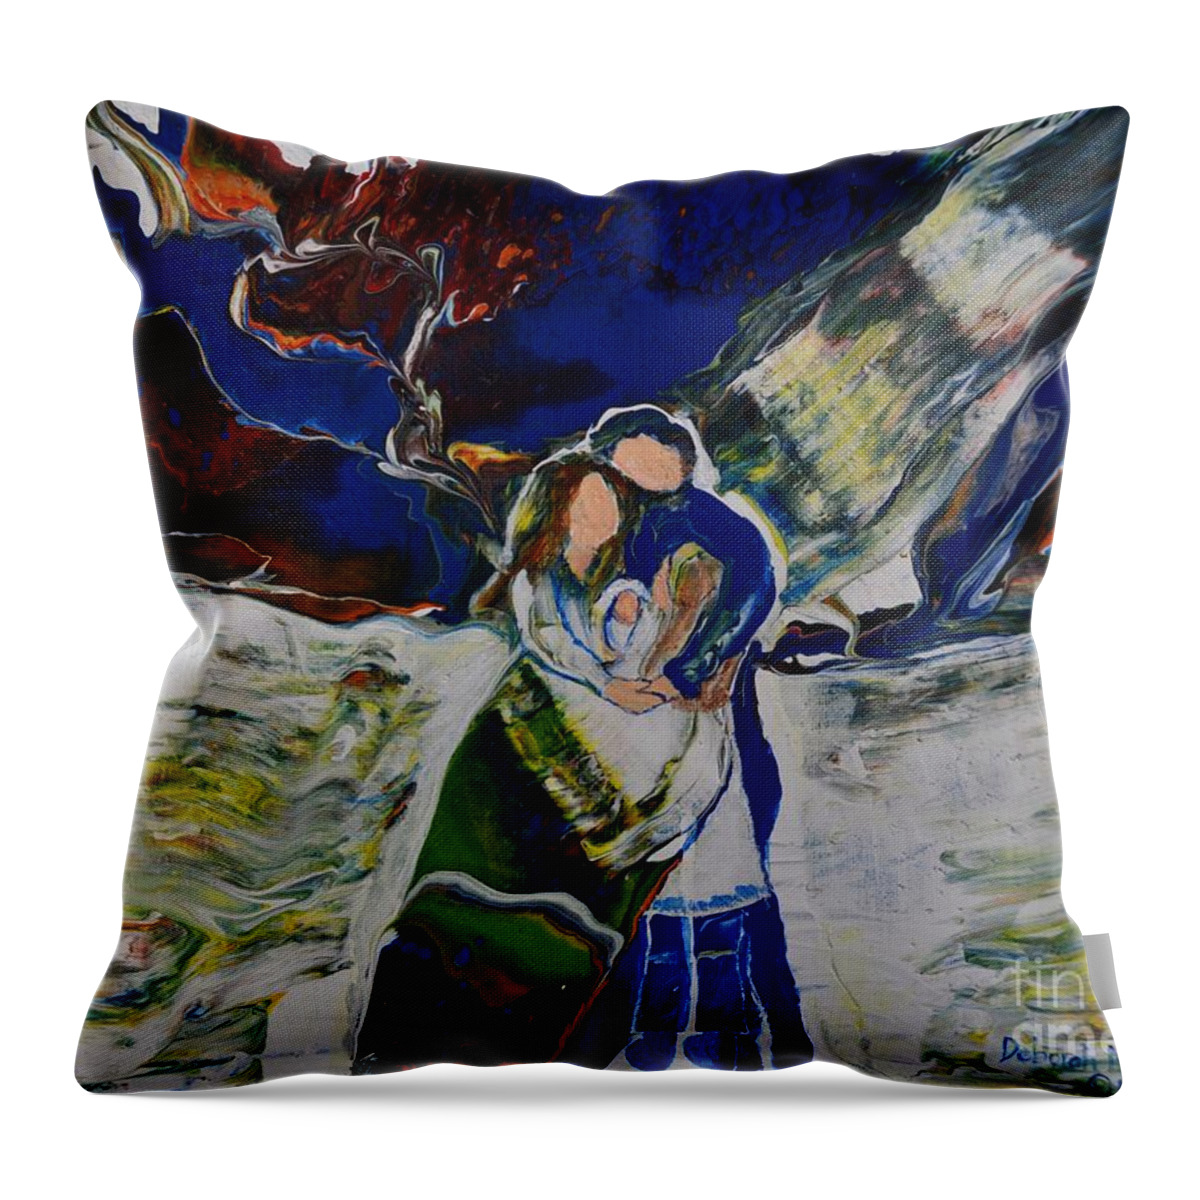 Acrylic Pour Throw Pillow featuring the painting Blessings From Above by Deborah Nell